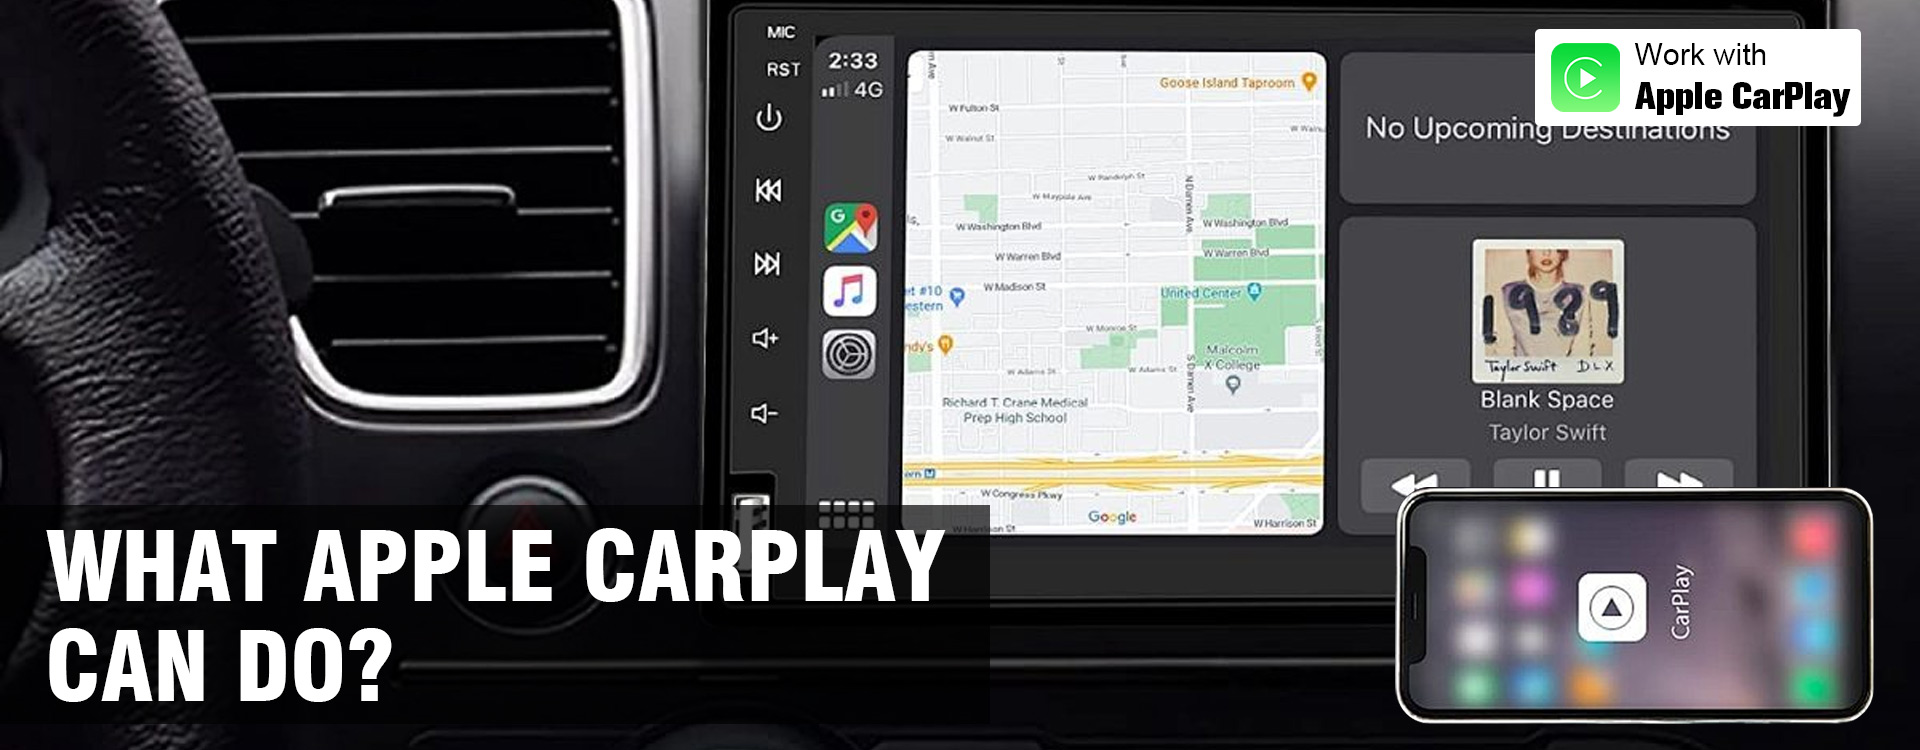 what apple carplay can do？